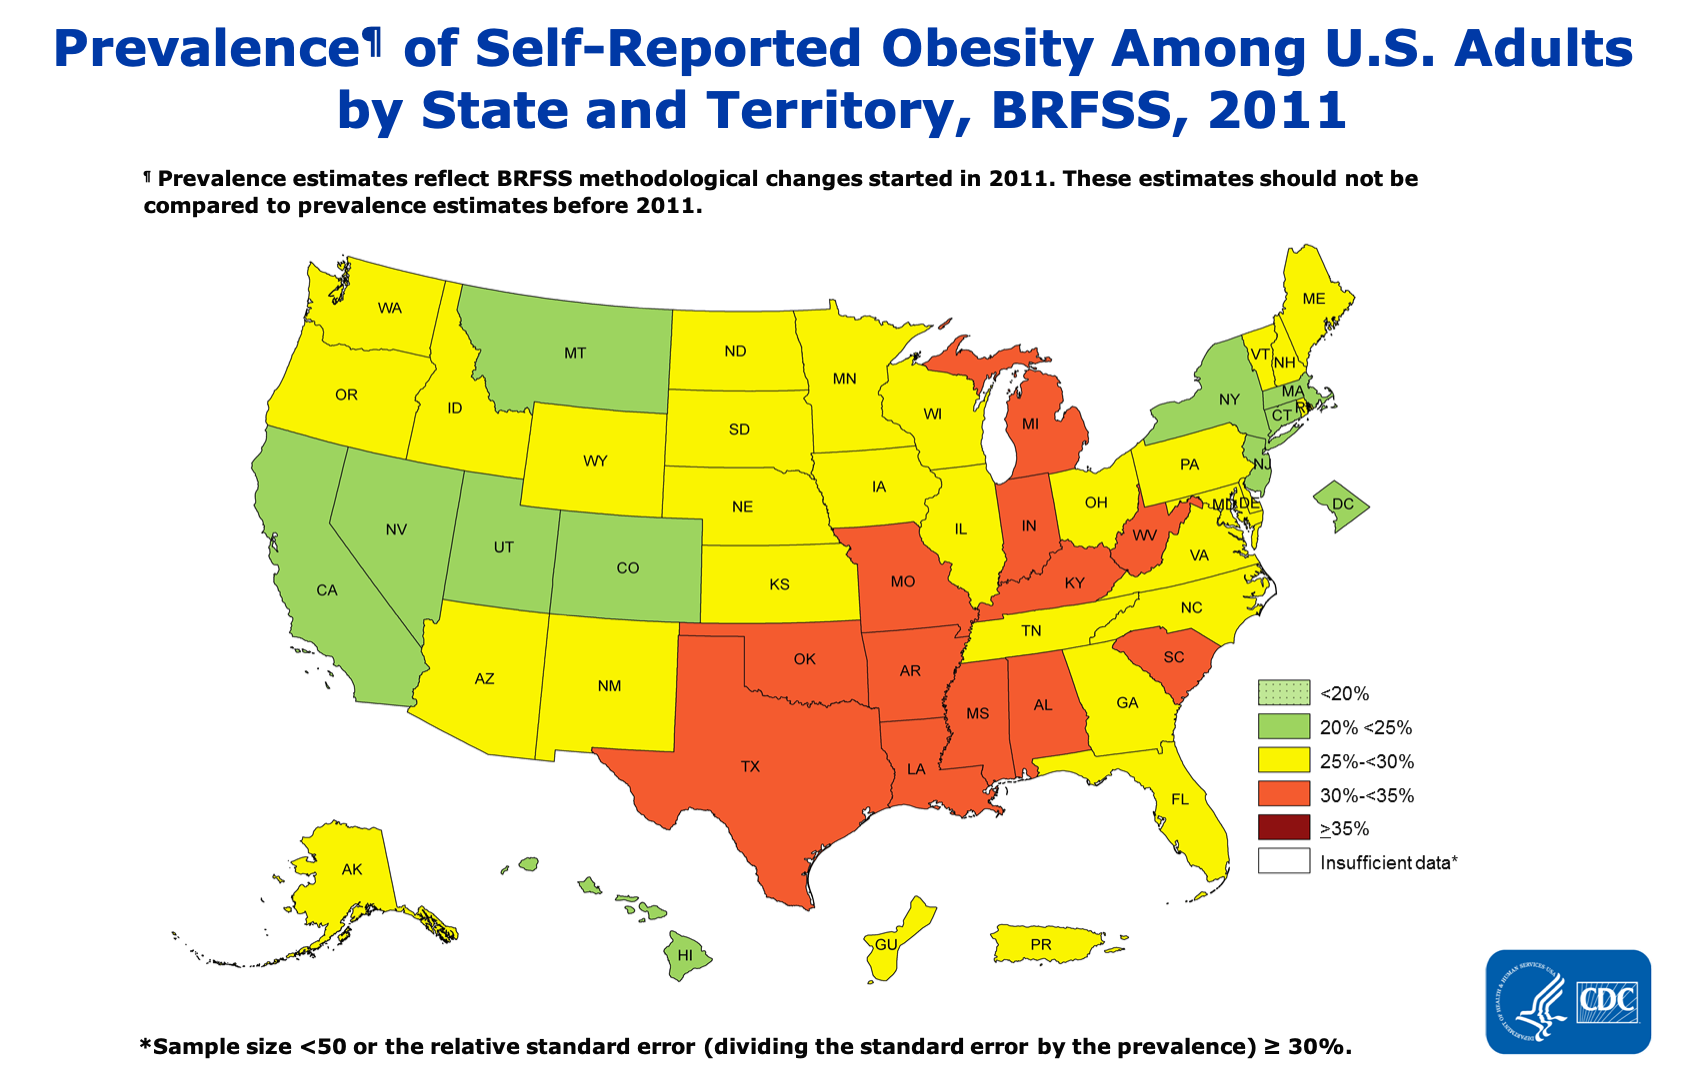 A map of the U.S. showing obesity prevalence color-coded by state. States are about evenly split between green (20-25% obesity), yellow (25-30% obesity), or red (30-35% obesity).